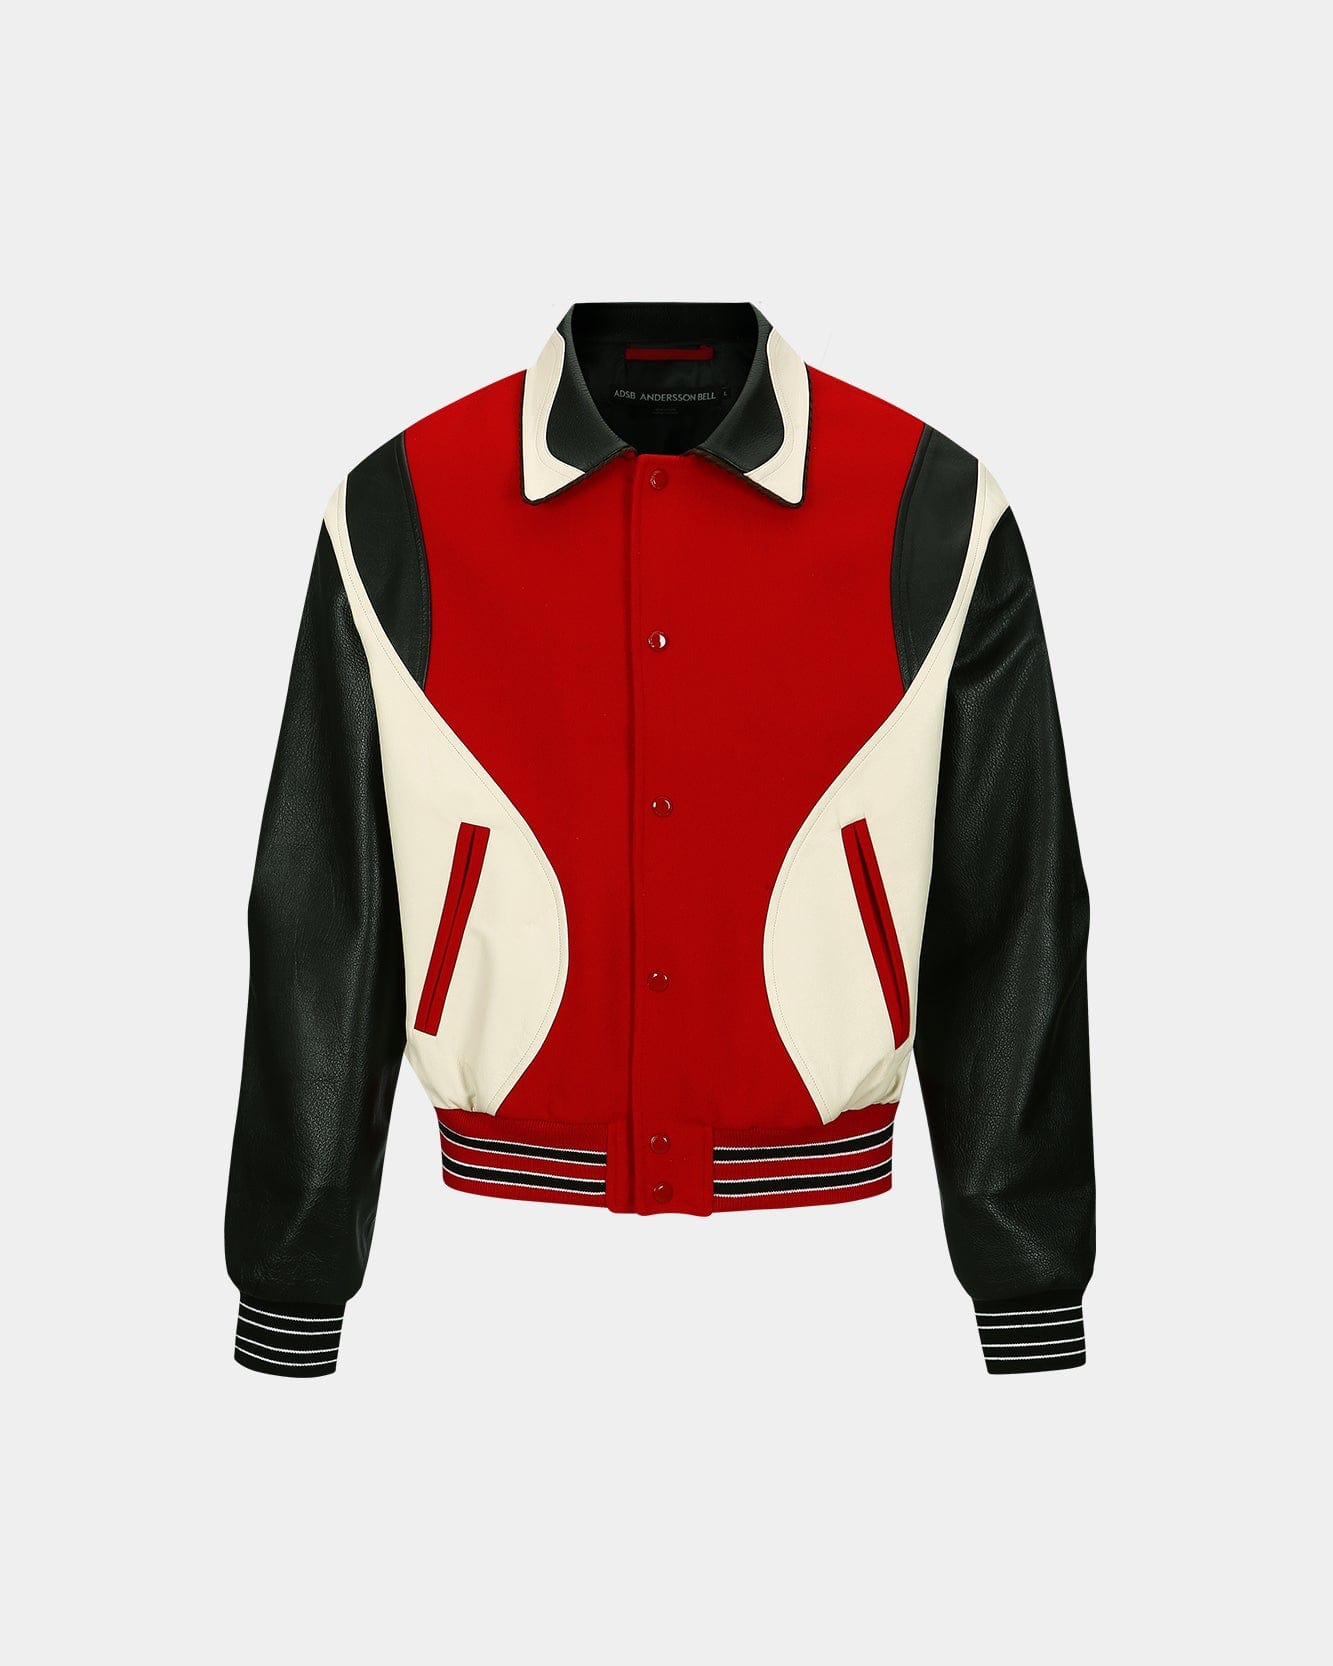 Andersson Bell ROBYN VARSITY JACKET awa584m(RED)